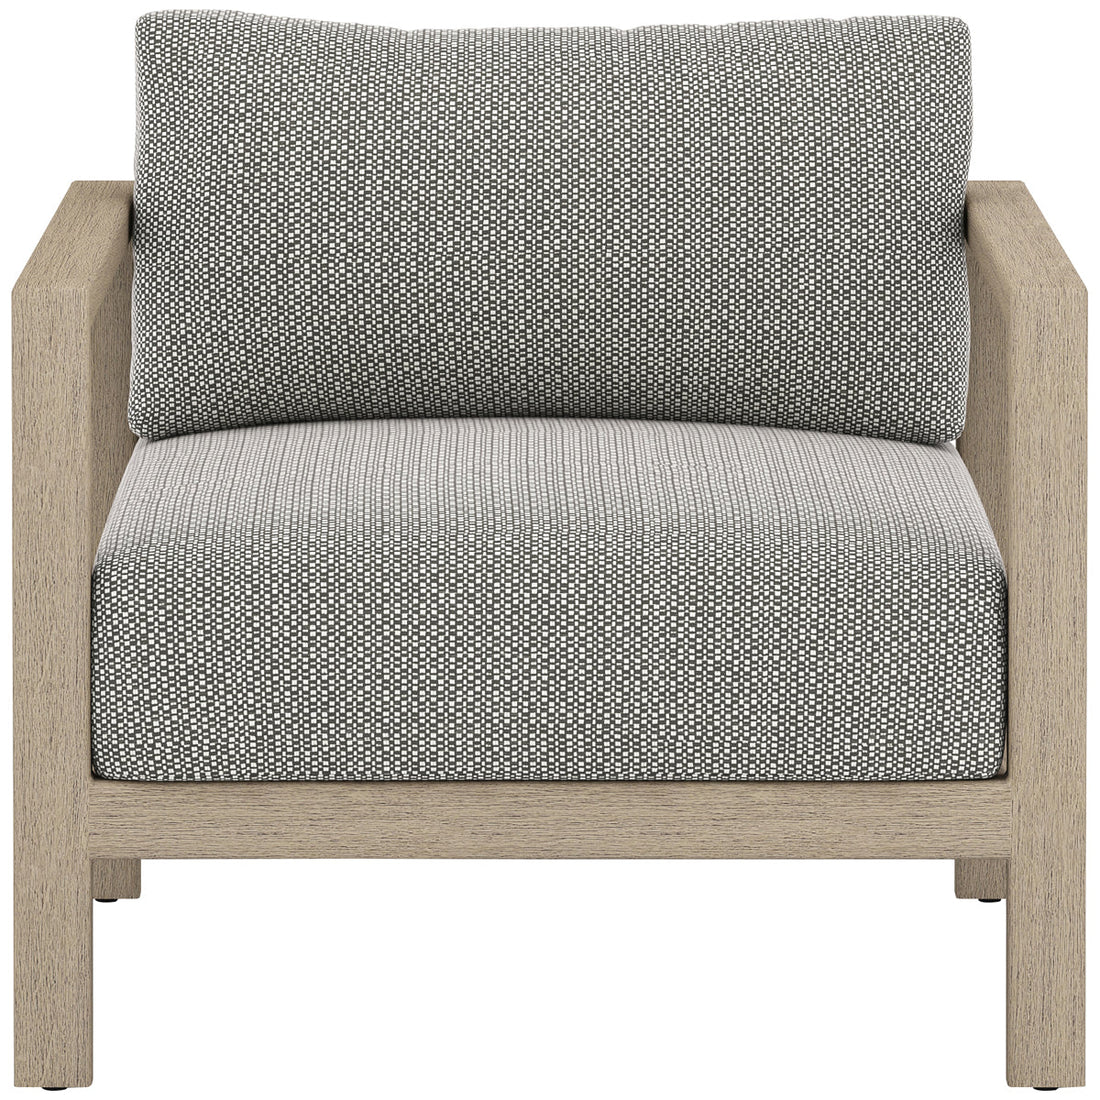 Four Hands Solano Sonoma Outdoor Chair